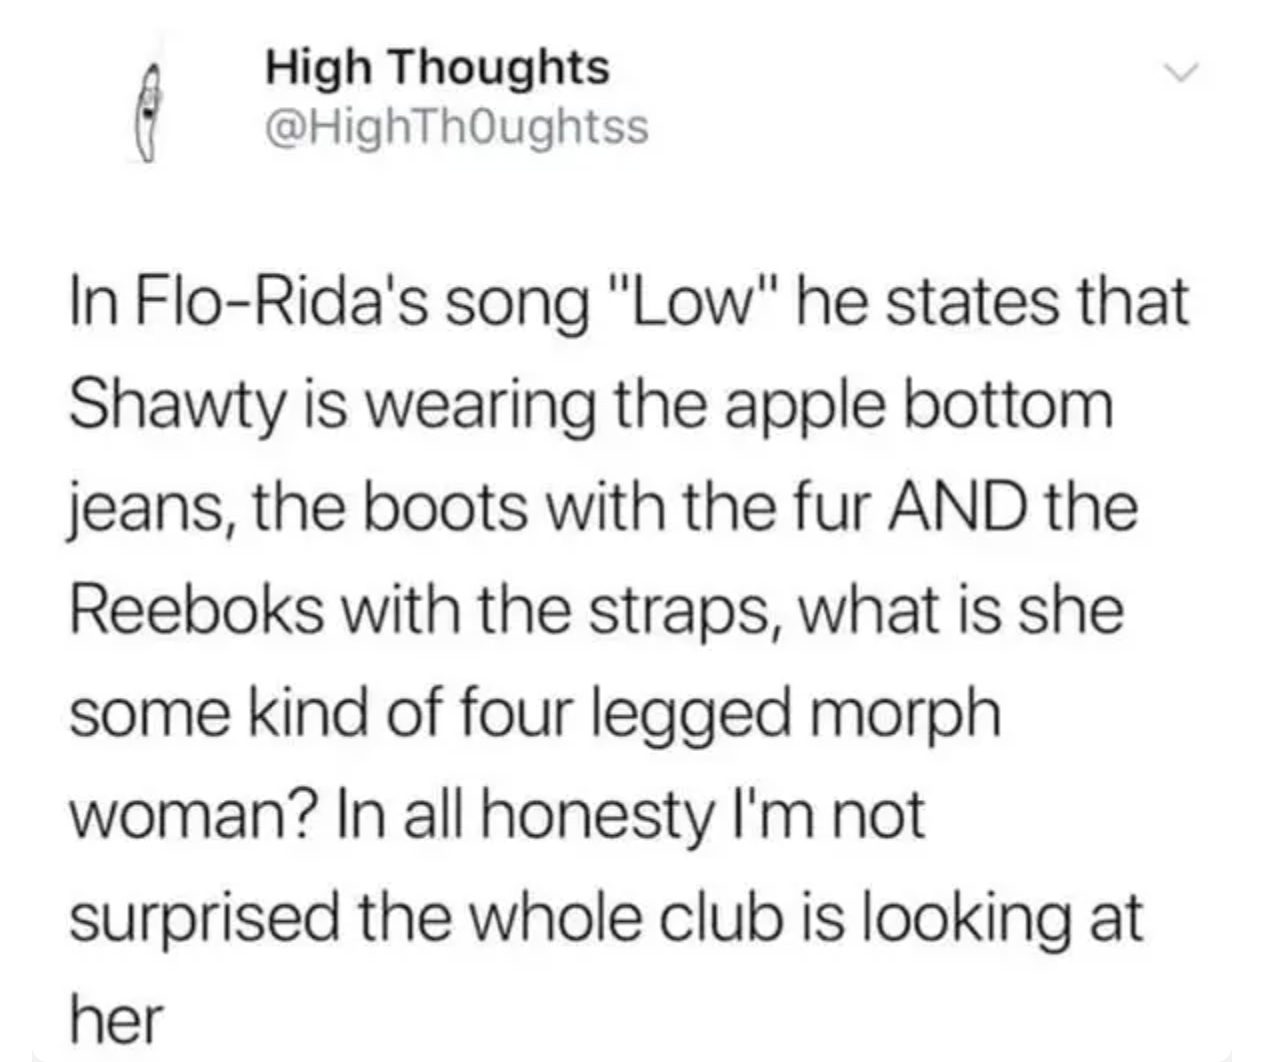 tweet about flo-rida&#x27;s song low and the lyrics are strange